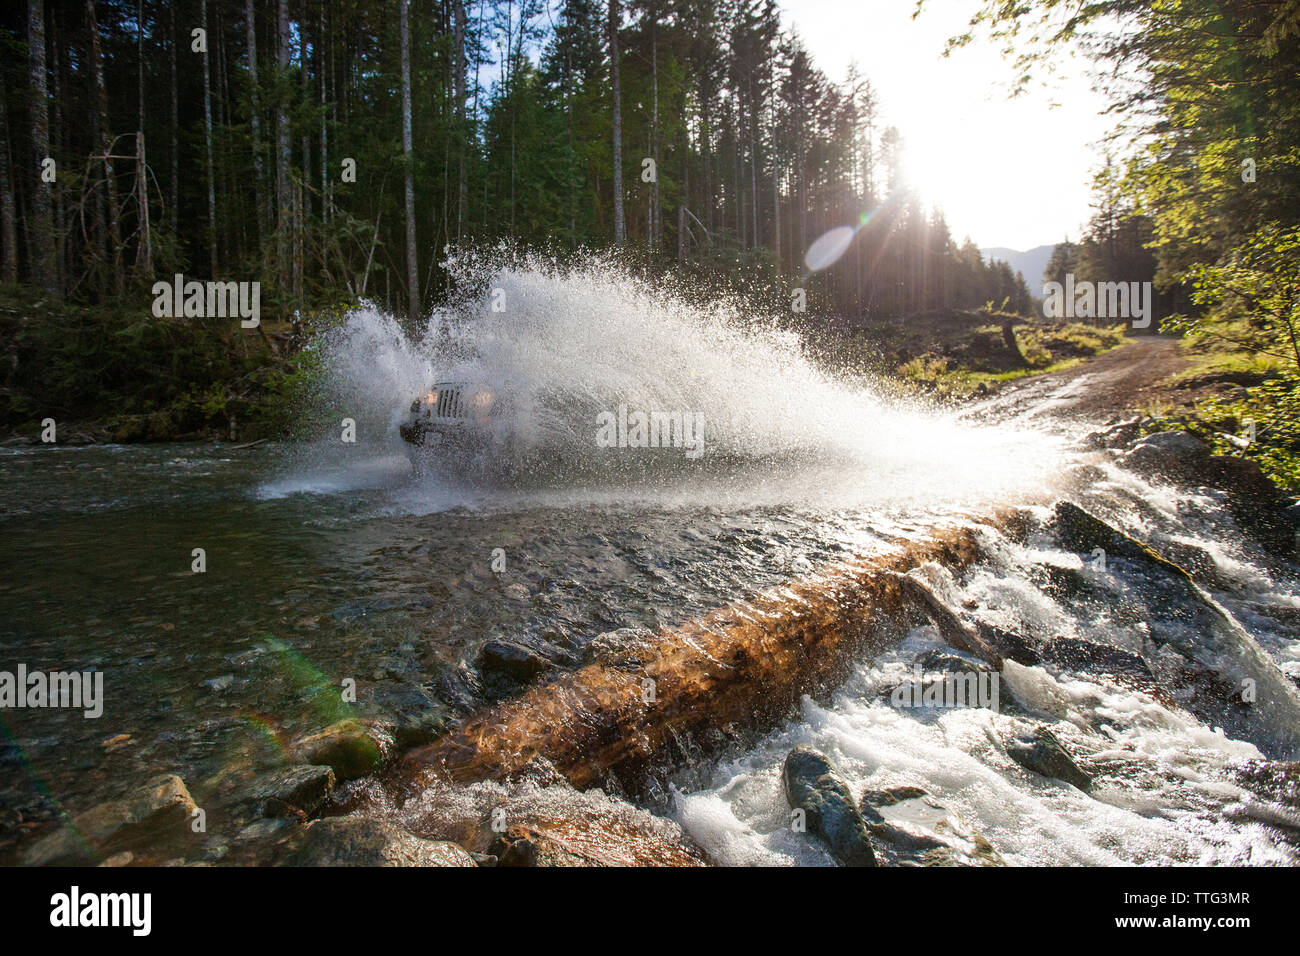 Offroad vehicle driving through river in British Columbia. Stock Photo